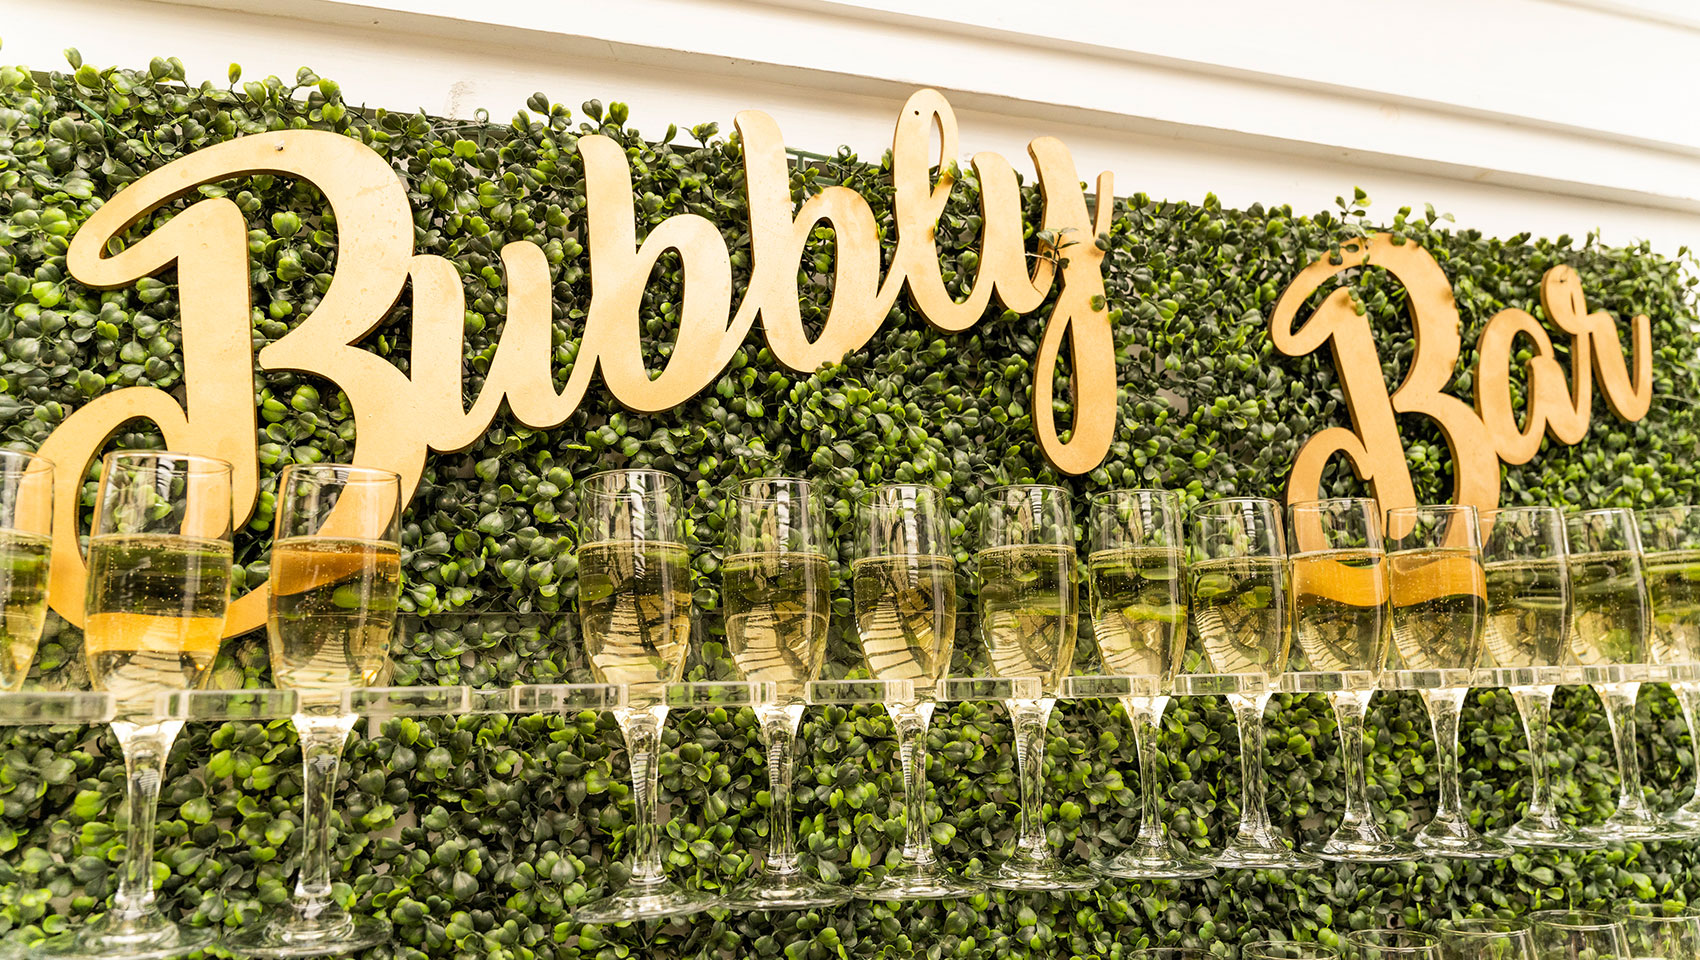 Event Signage 'Bubbly Bar'